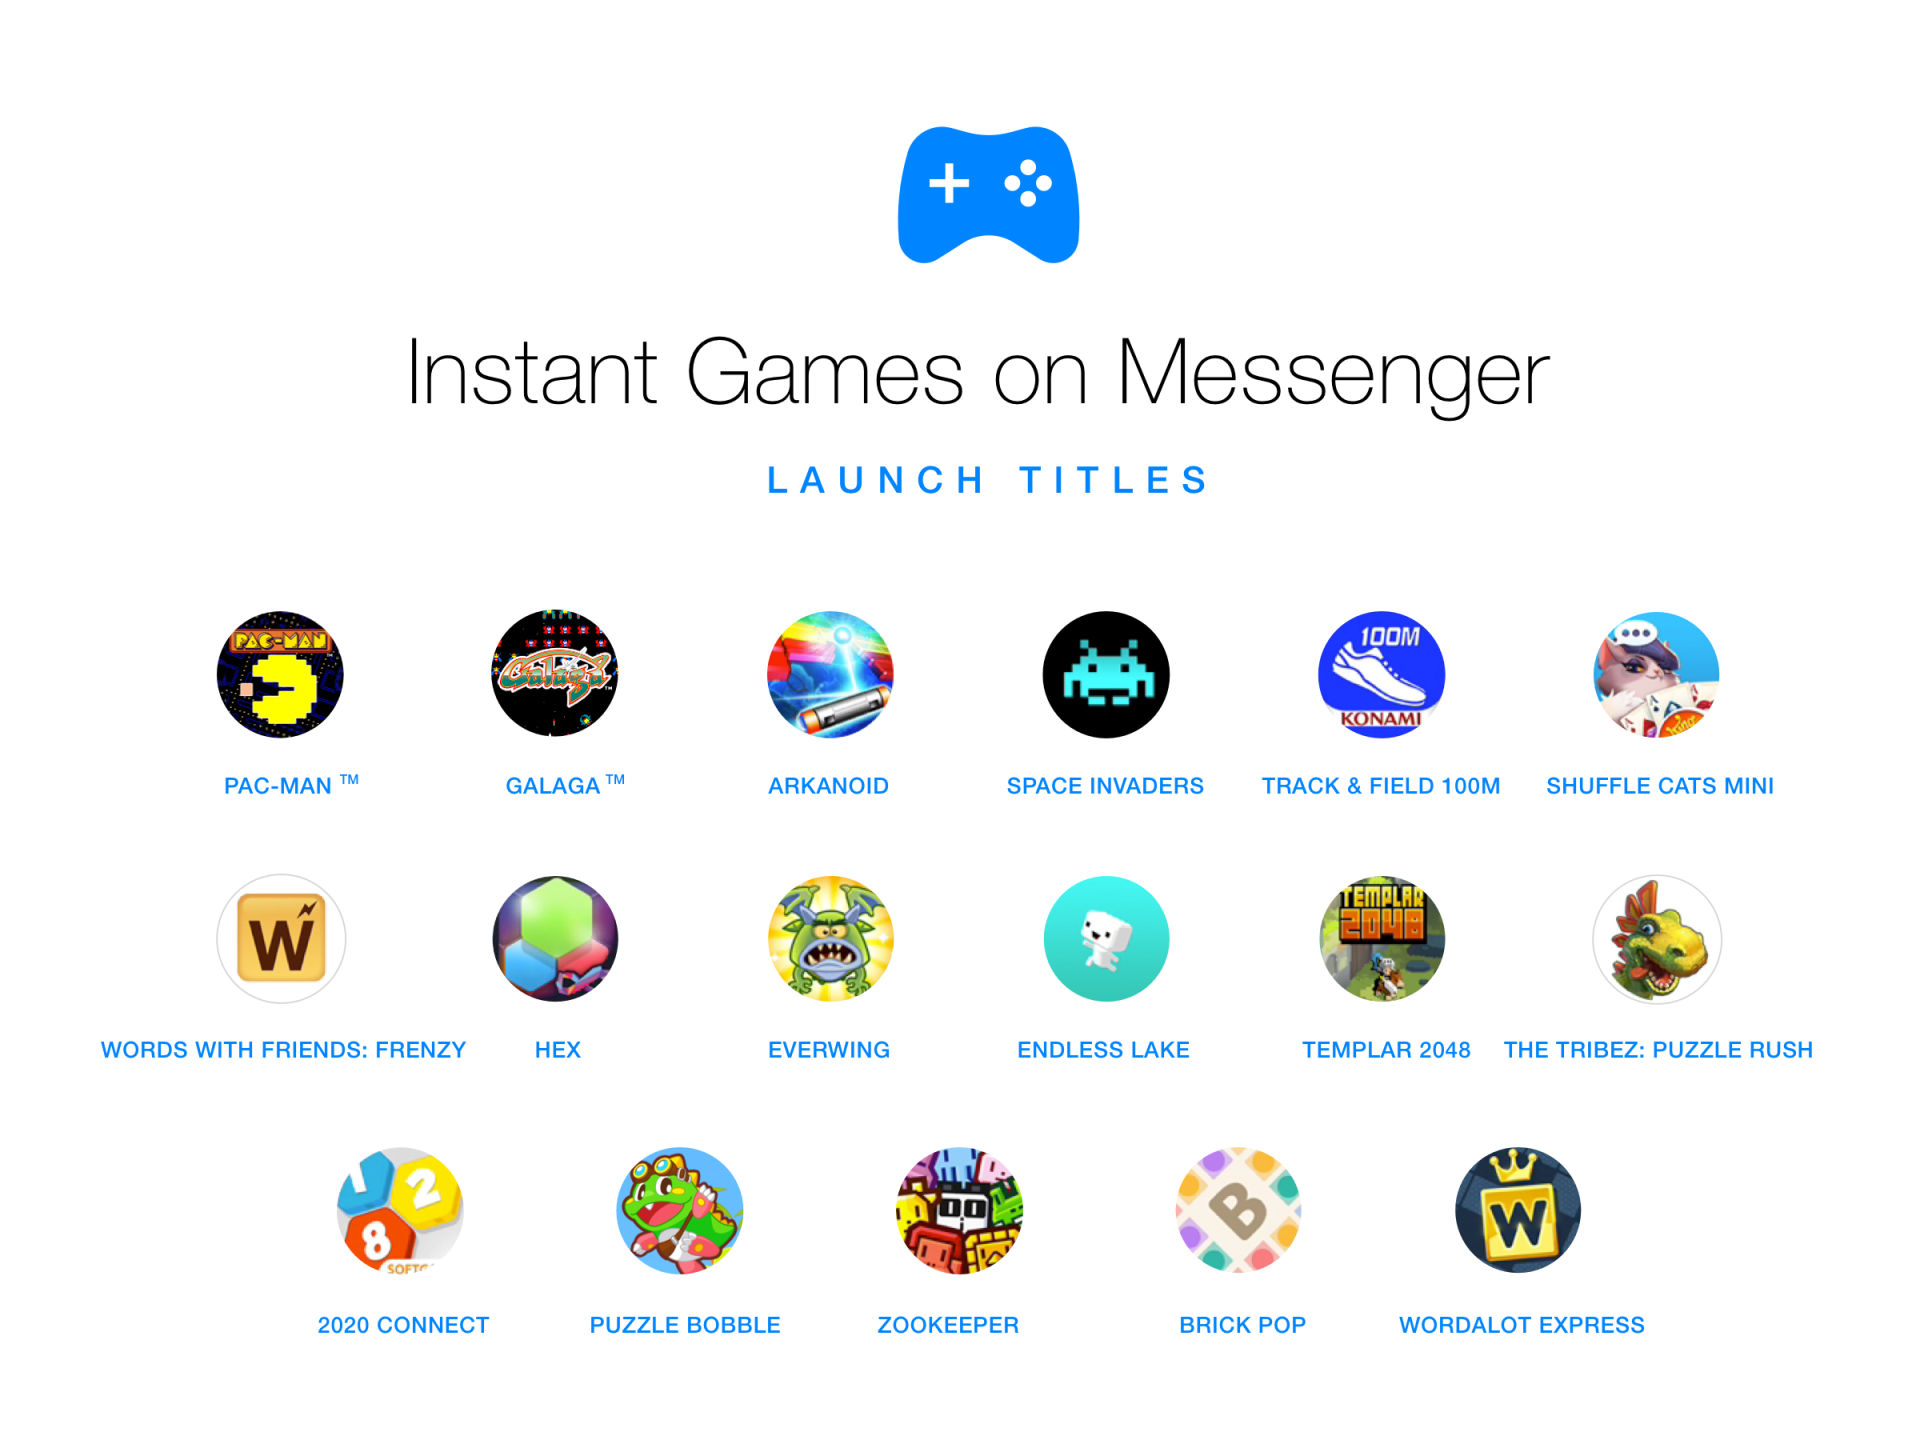 facebook messenger lets you play instant games like pac man here s how to find and play them image 2